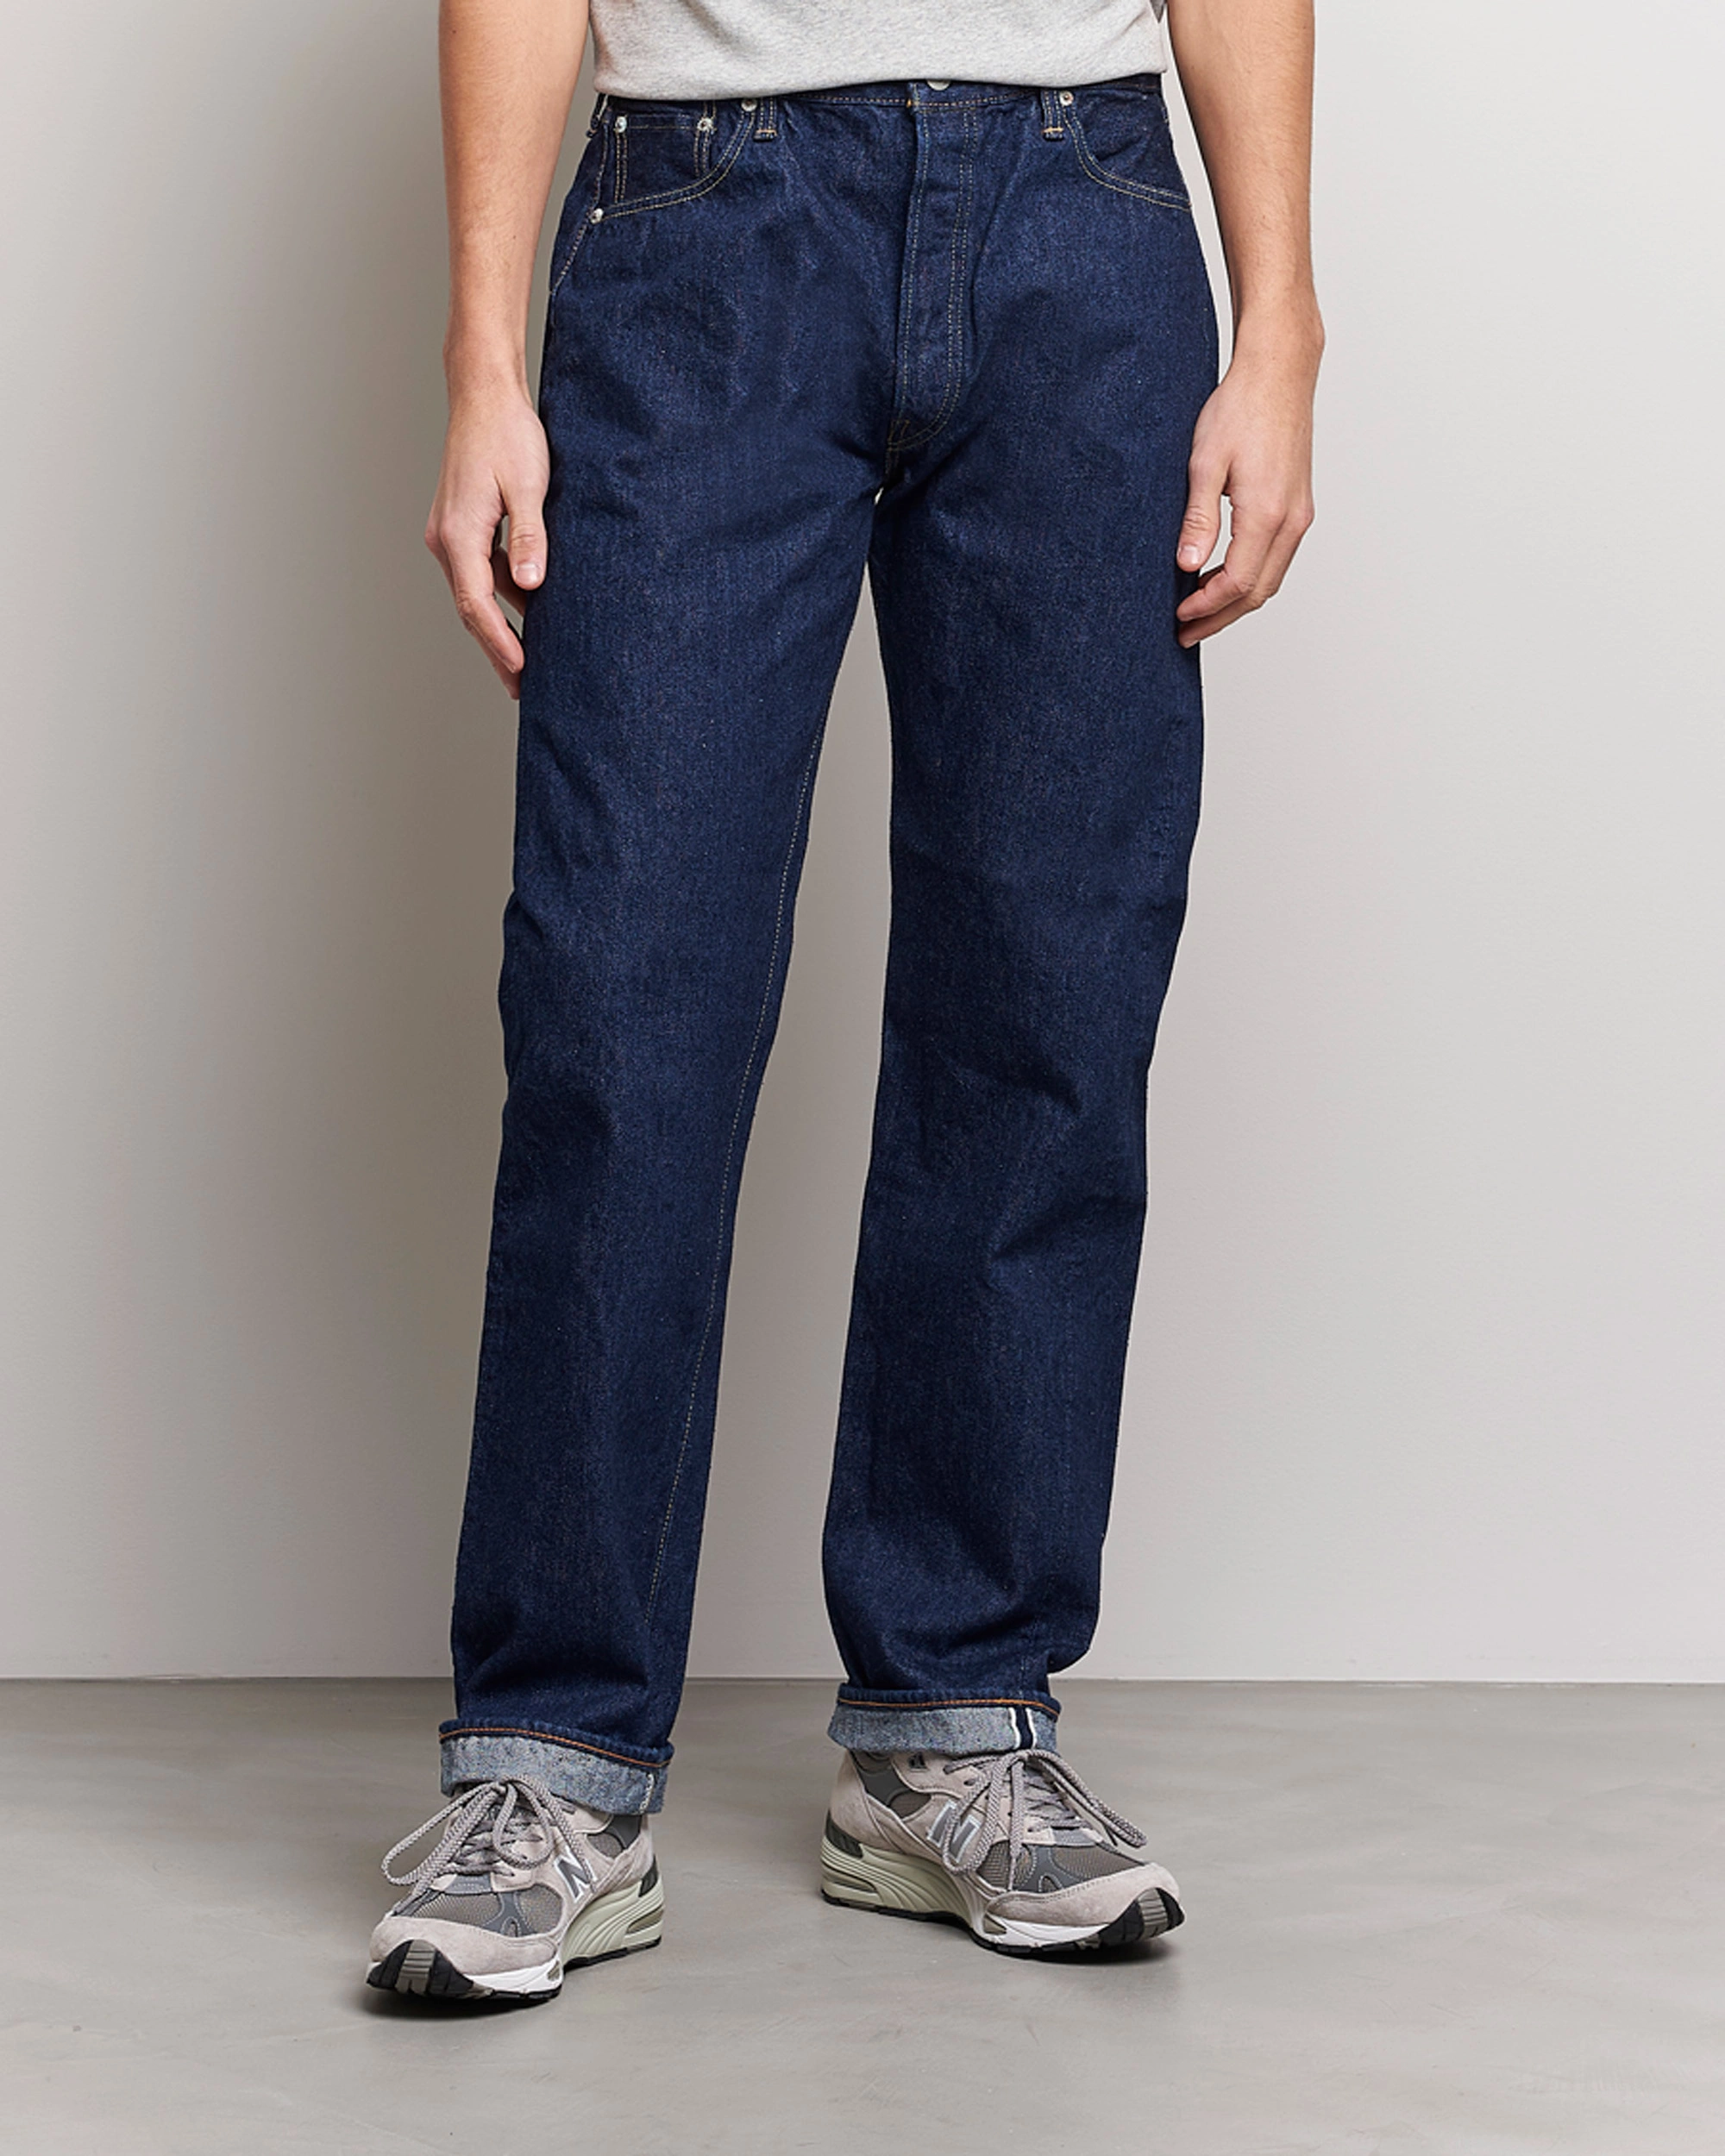 Mies | Vaatteet | orSlow | Straight Fit 105 Selvedge Jeans One Wash